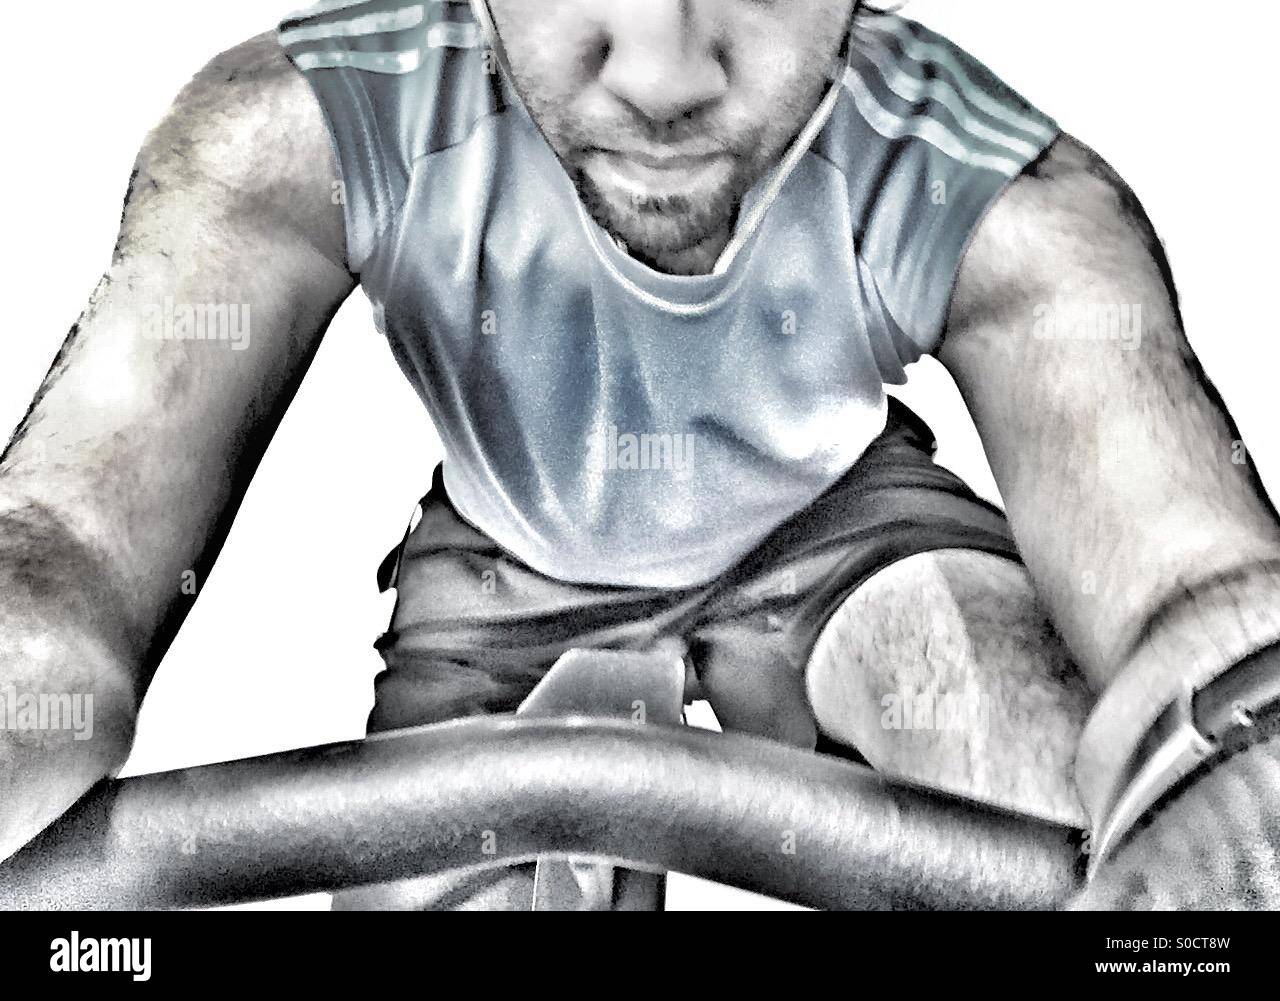 A guy at the gym on a stationary bike Stock Photo